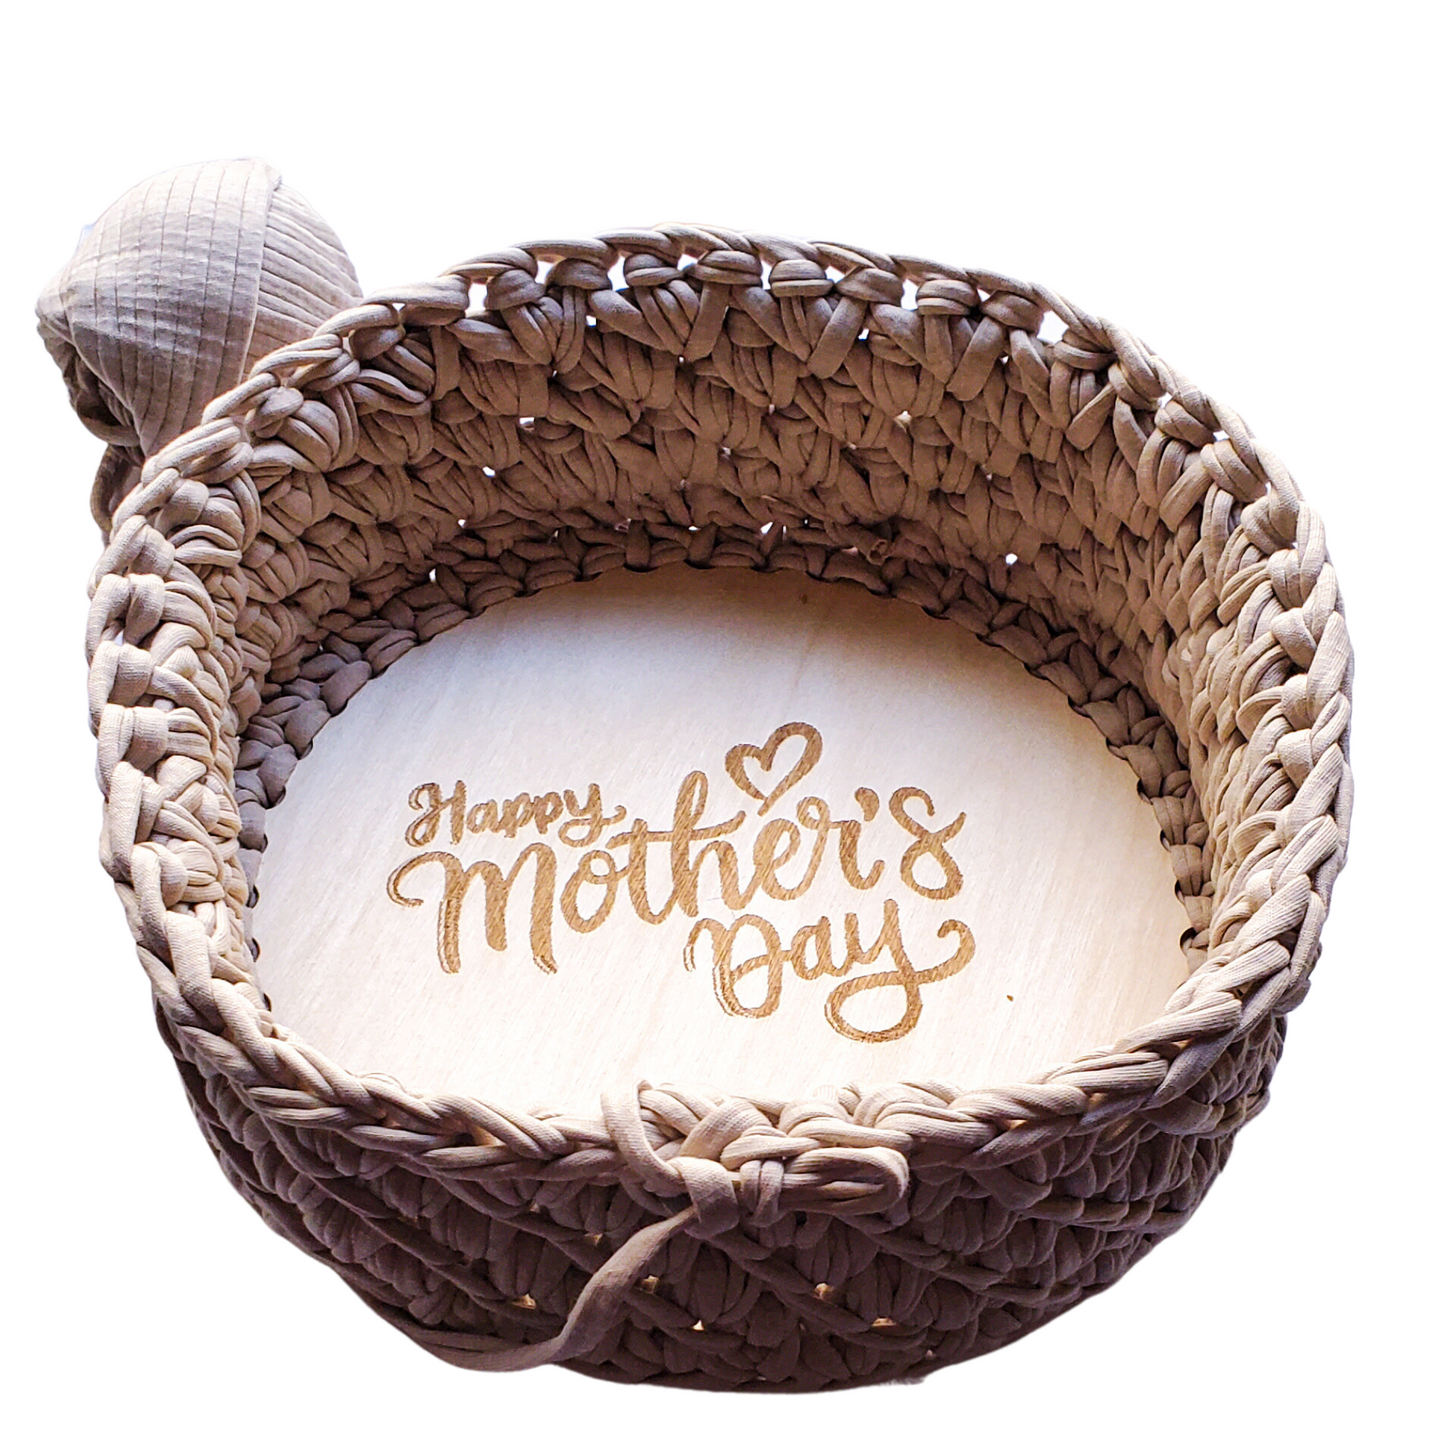 Basket wooden base for Mother's Day